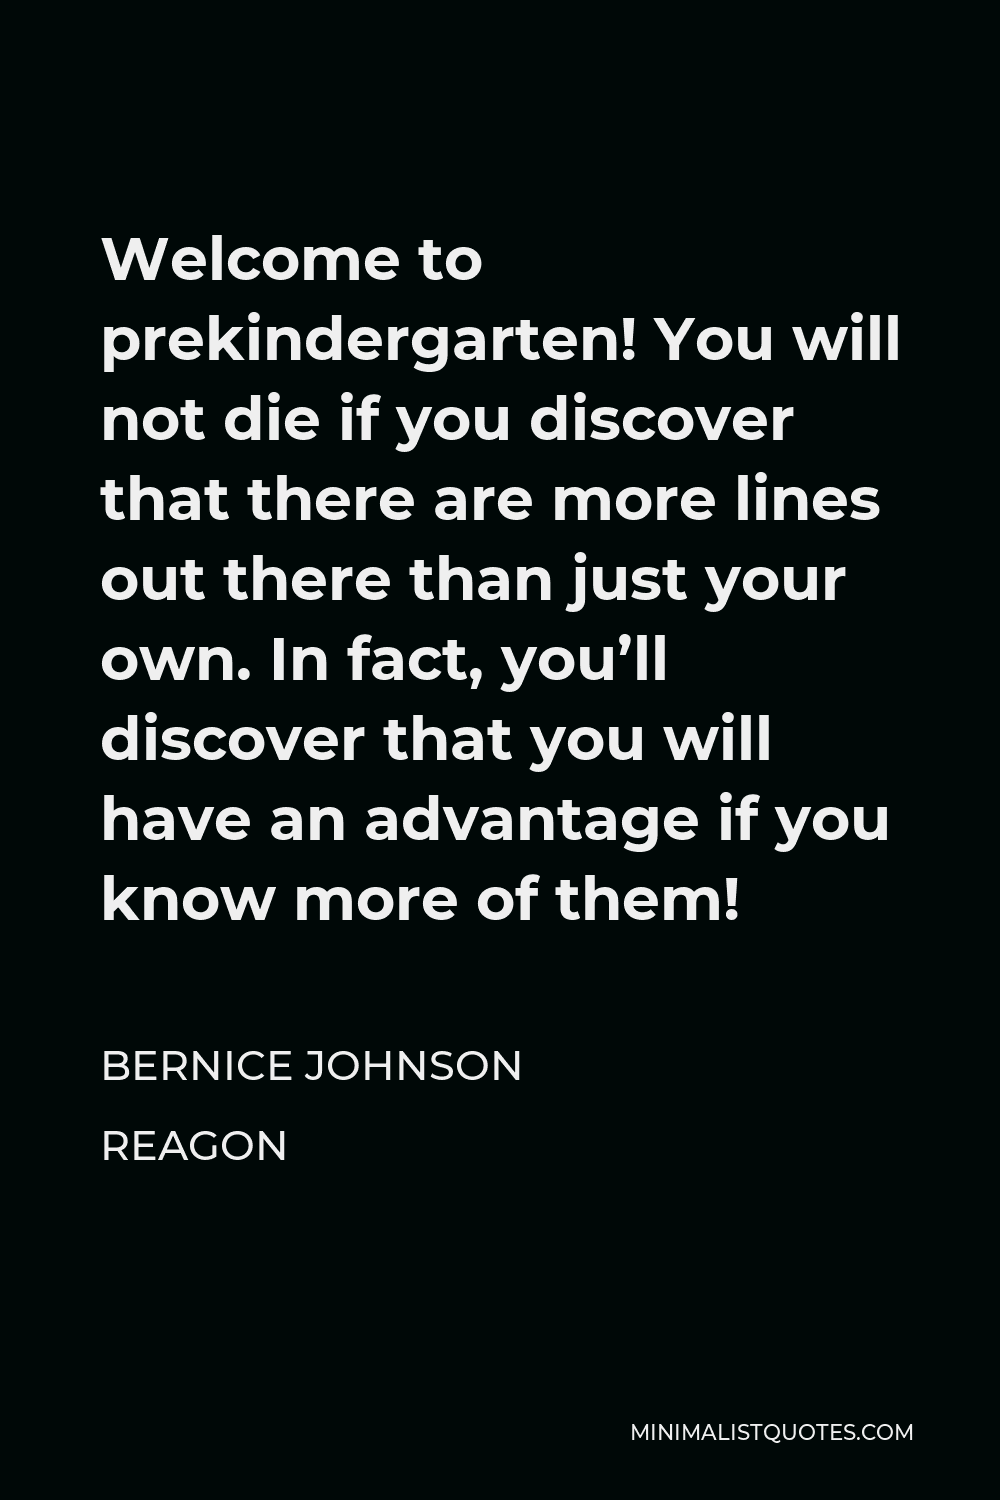 Bernice Johnson Reagon Quote - Welcome to prekindergarten! You will not die if you discover that there are more lines out there than just your own. In fact, you’ll discover that you will have an advantage if you know more of them!